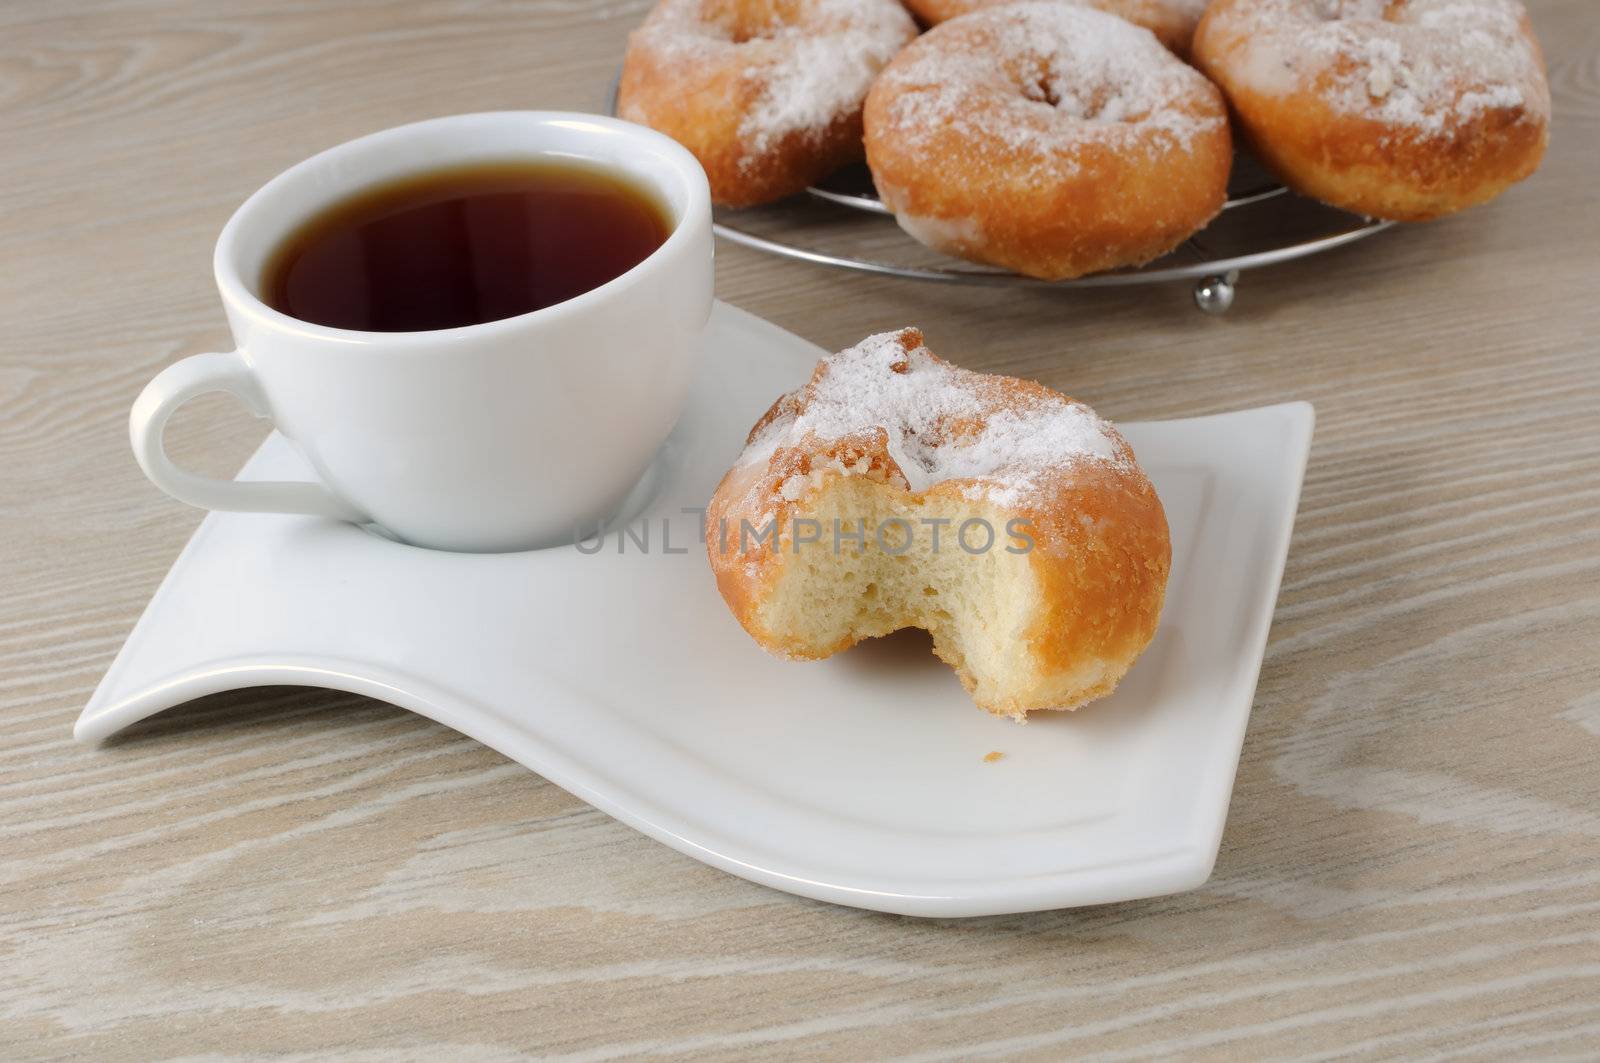 A cup of coffee and donut bitten in the powdered sugar on a plate